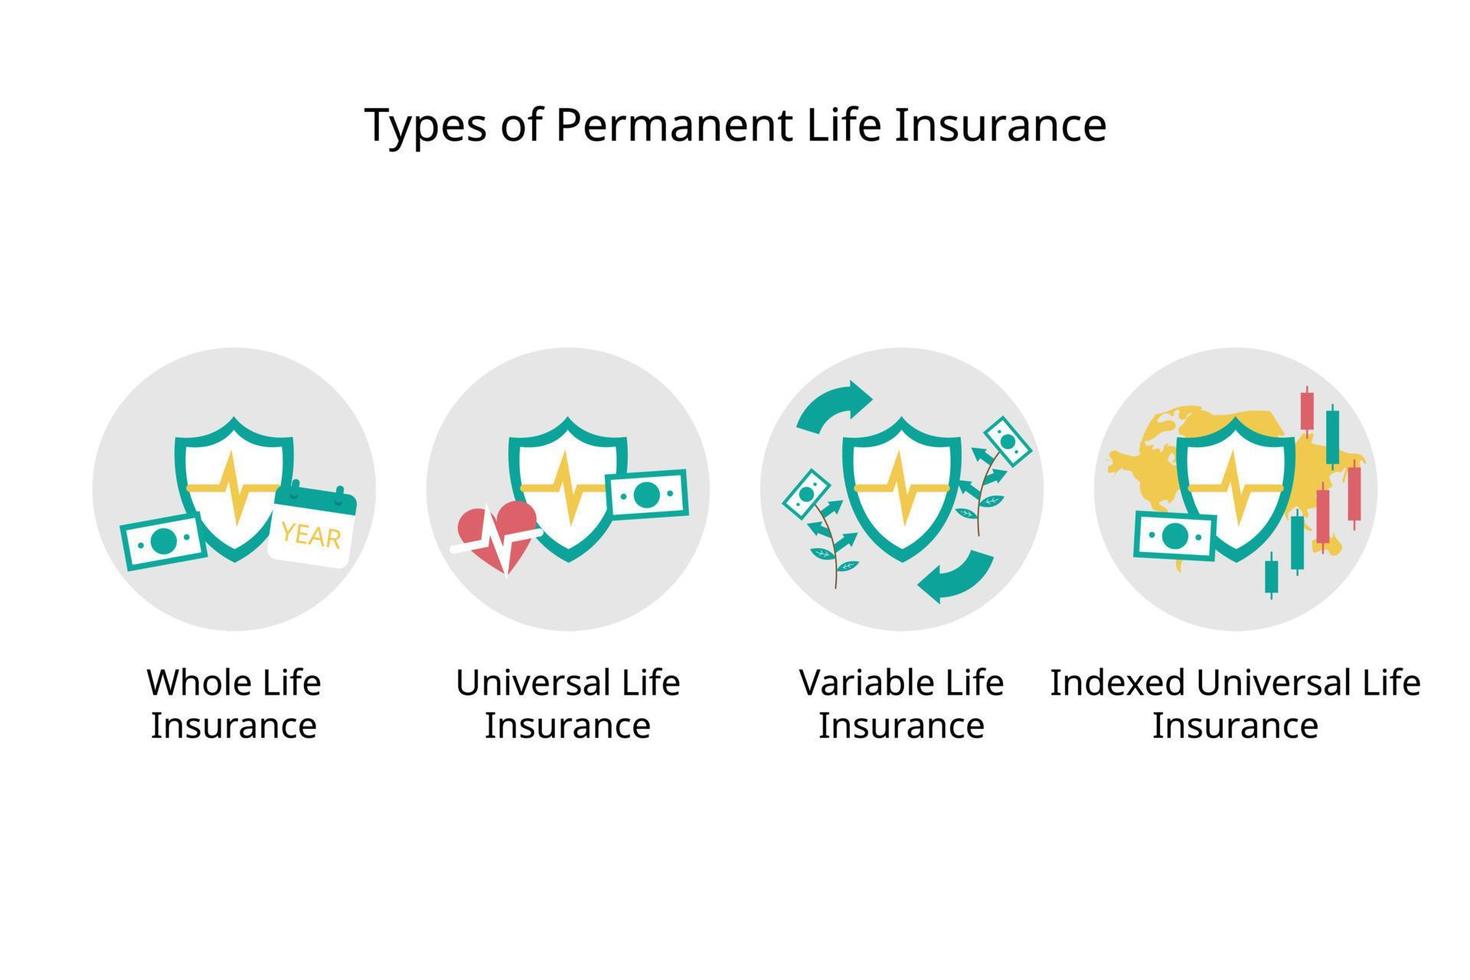 types of permanent life insurance for cash value life insurance of whole life, standard universal life insurance, variable and indexed type vector